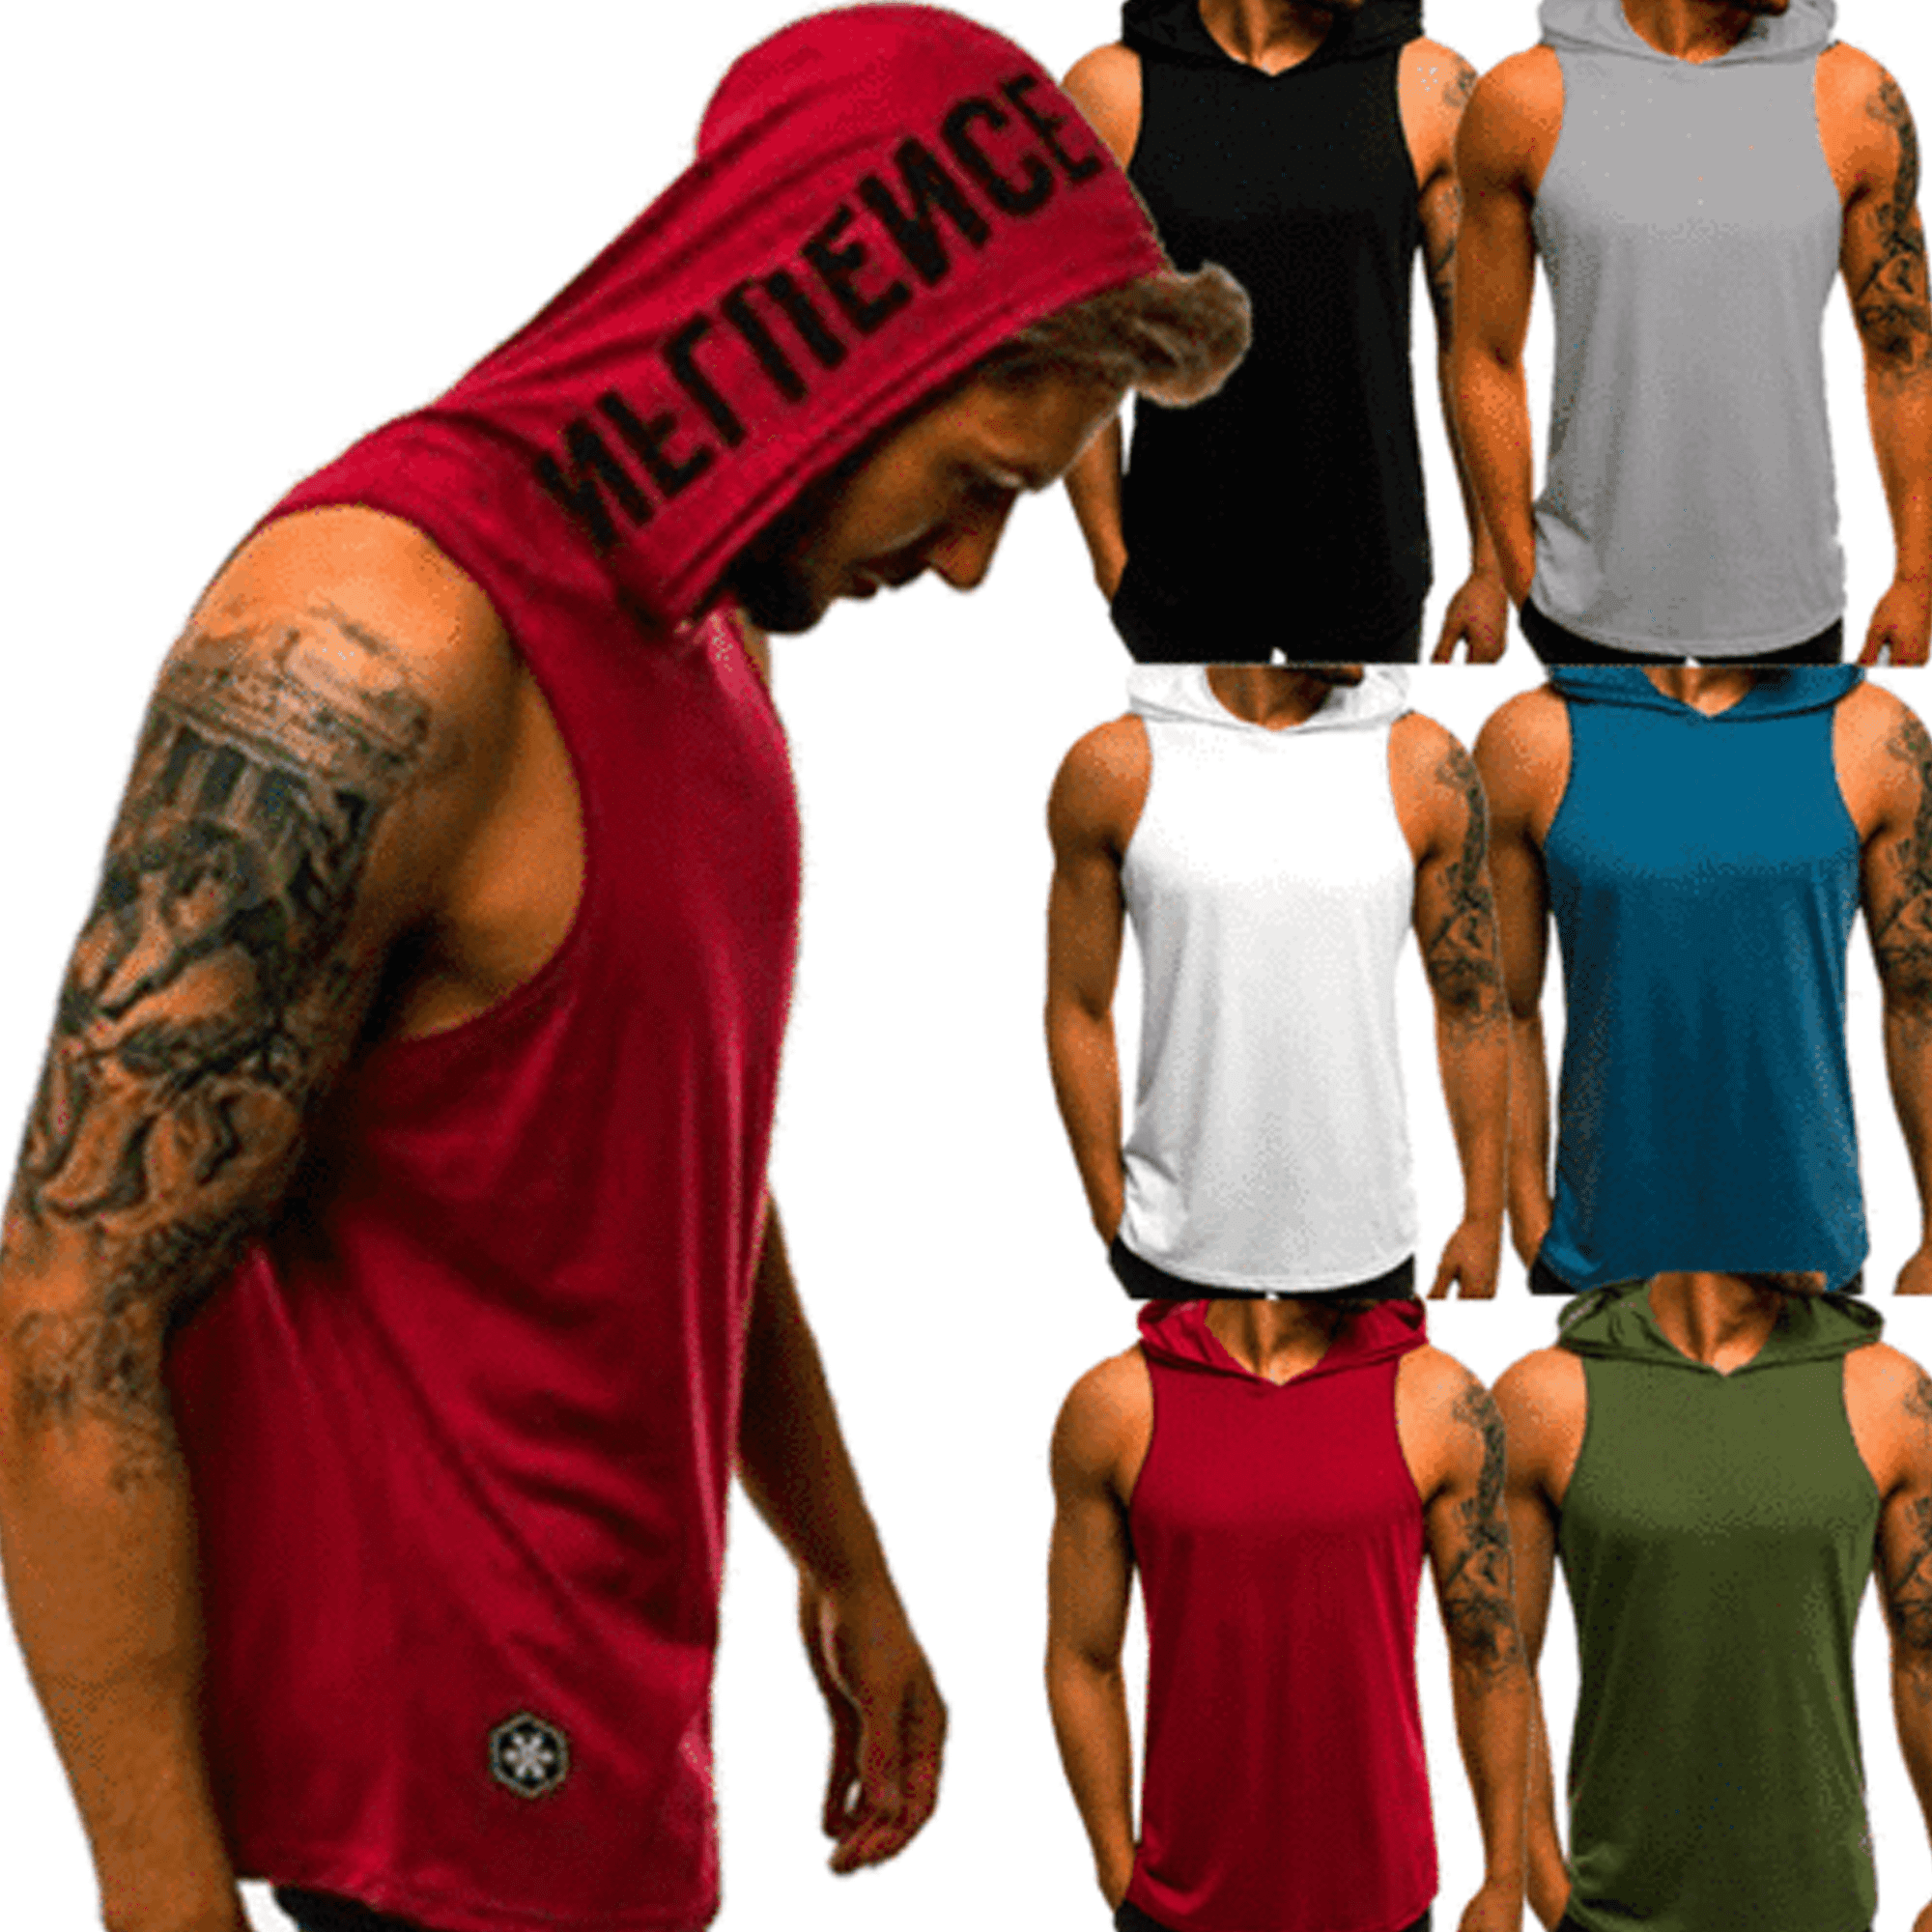 Aixdir Sleeveless Hoodie Men Workout Hooded Tank Top Gym Muscle Shirts with Pocket